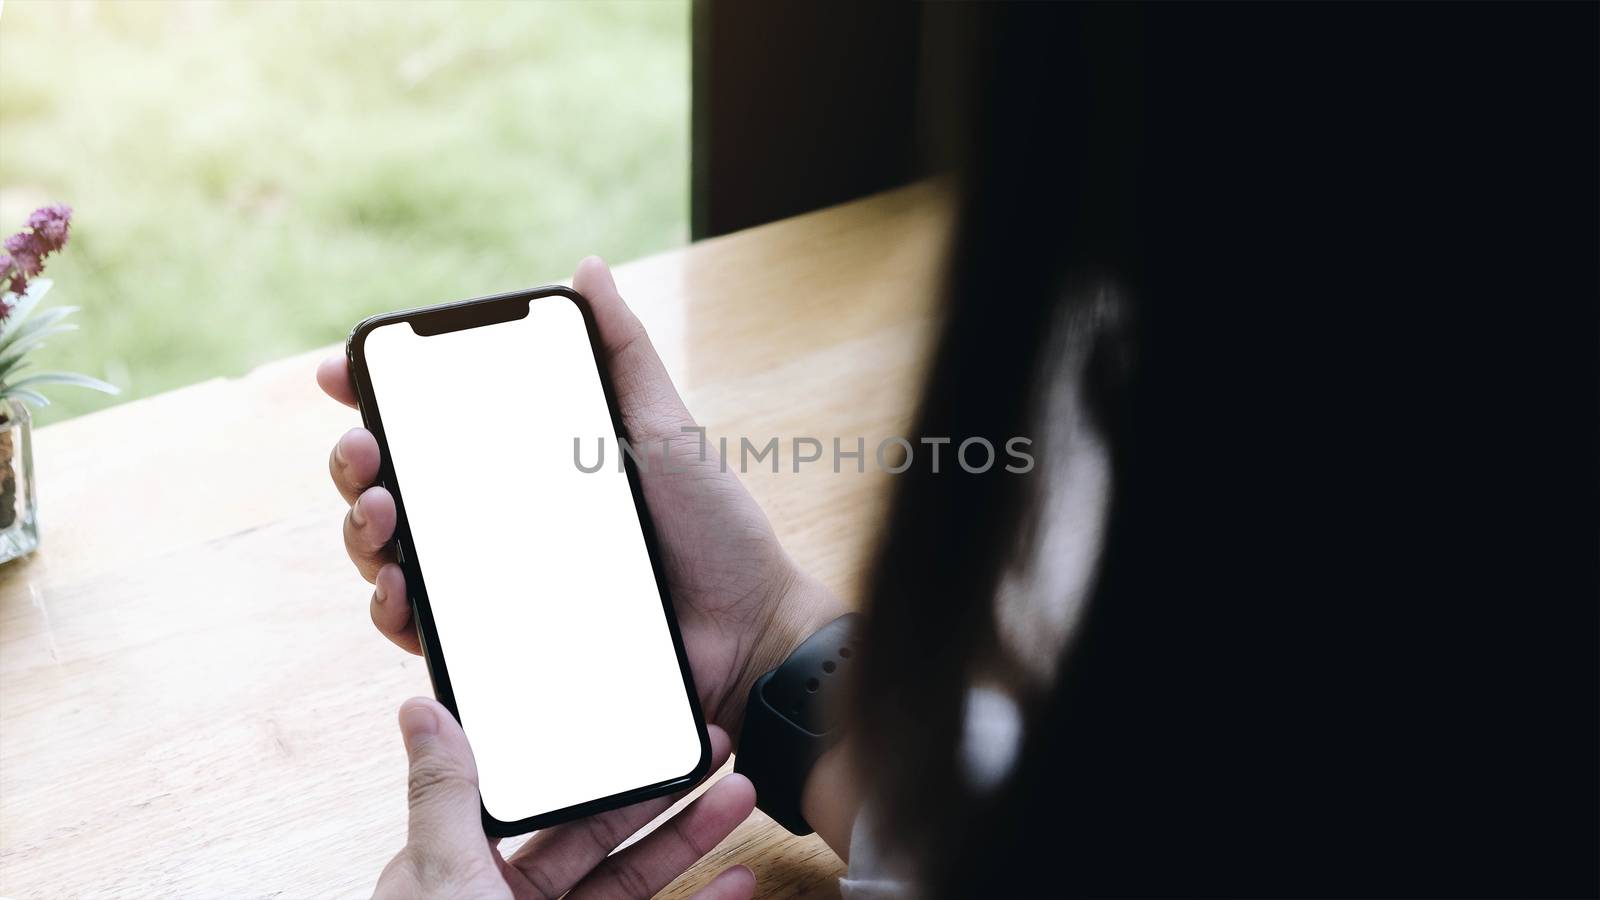 Mockup image of woman's hands holding white mobile phone with blank screen.
